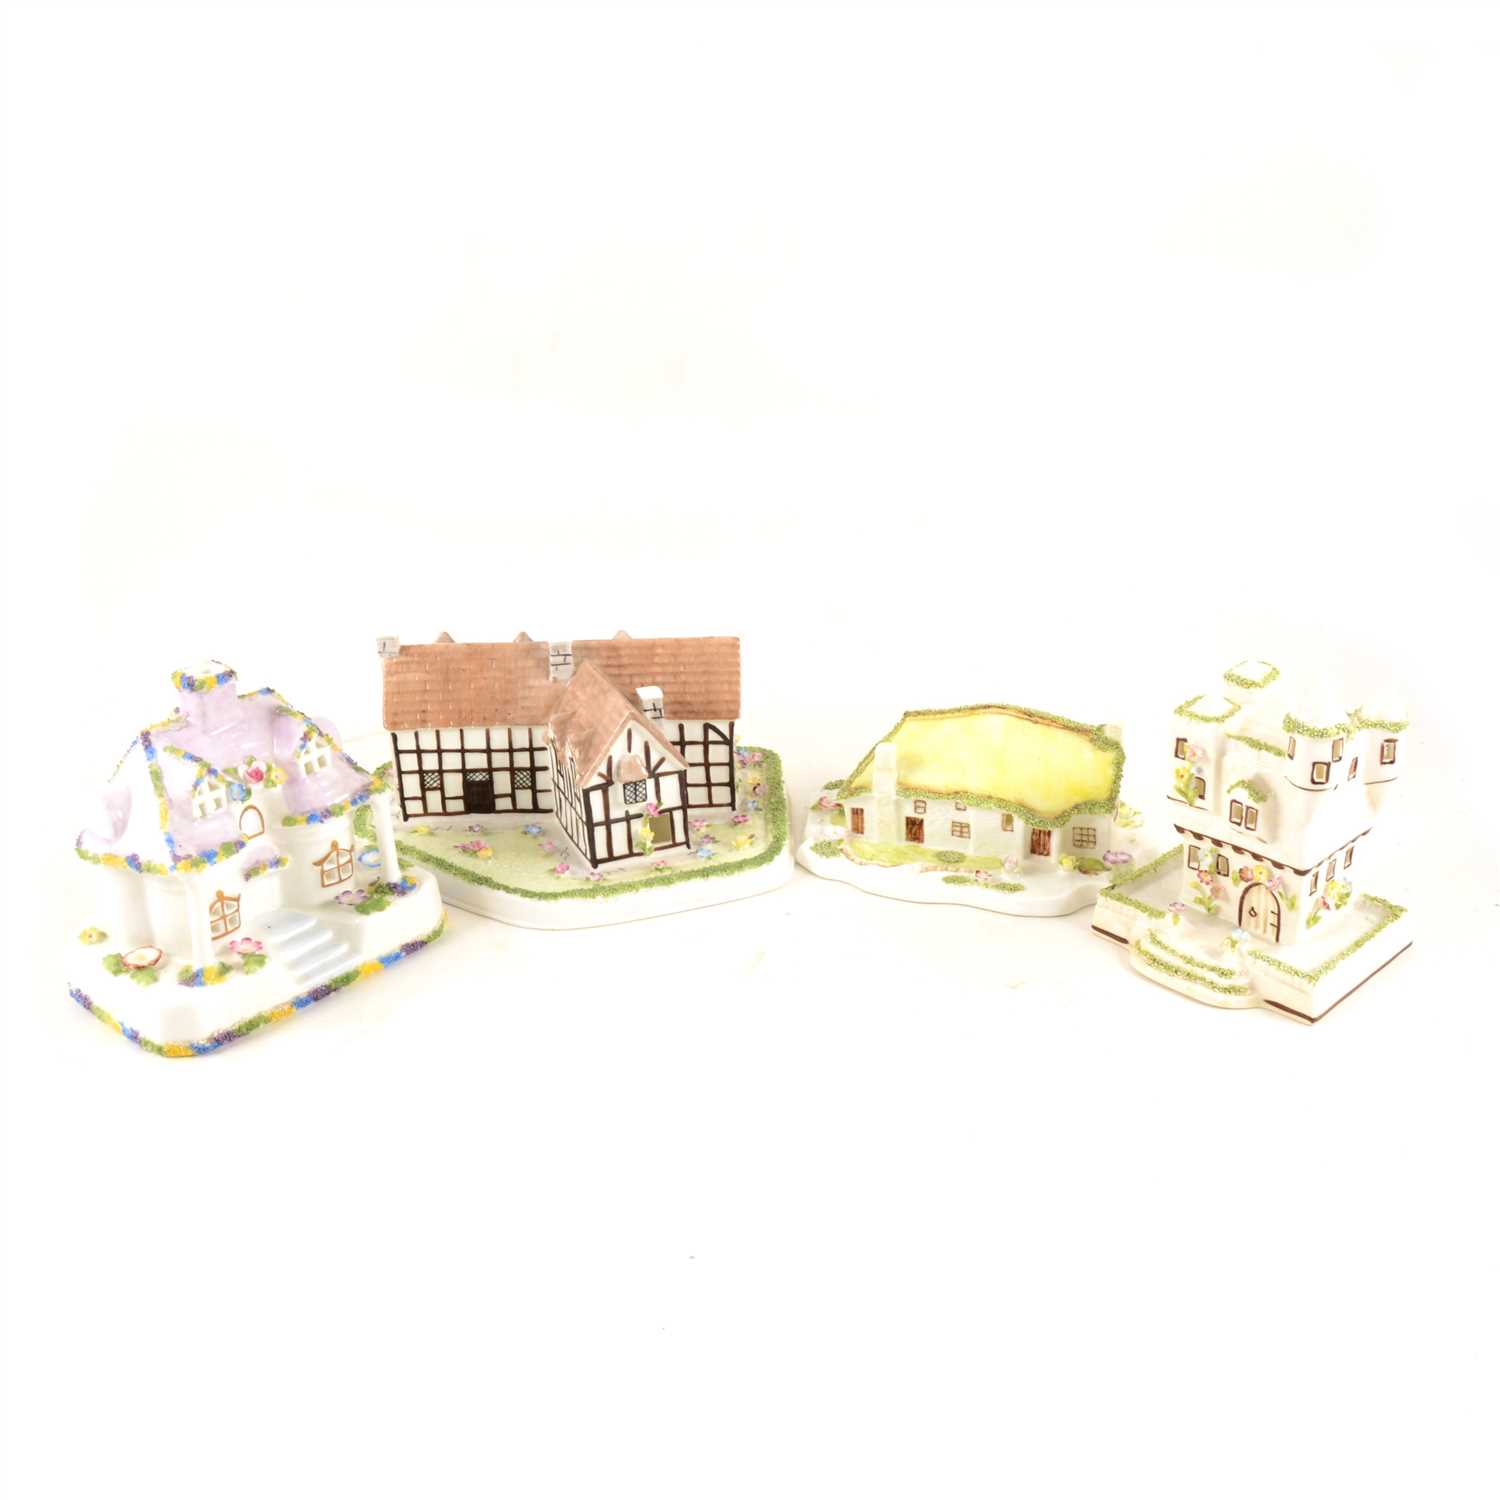 Lot 38 - A collection of Coalport cottages, to include Watchdog Corner, with limited edition certificate, 231/500, Summer House, with limited edition certificate, 121/500, Shakespeare's Birthplace